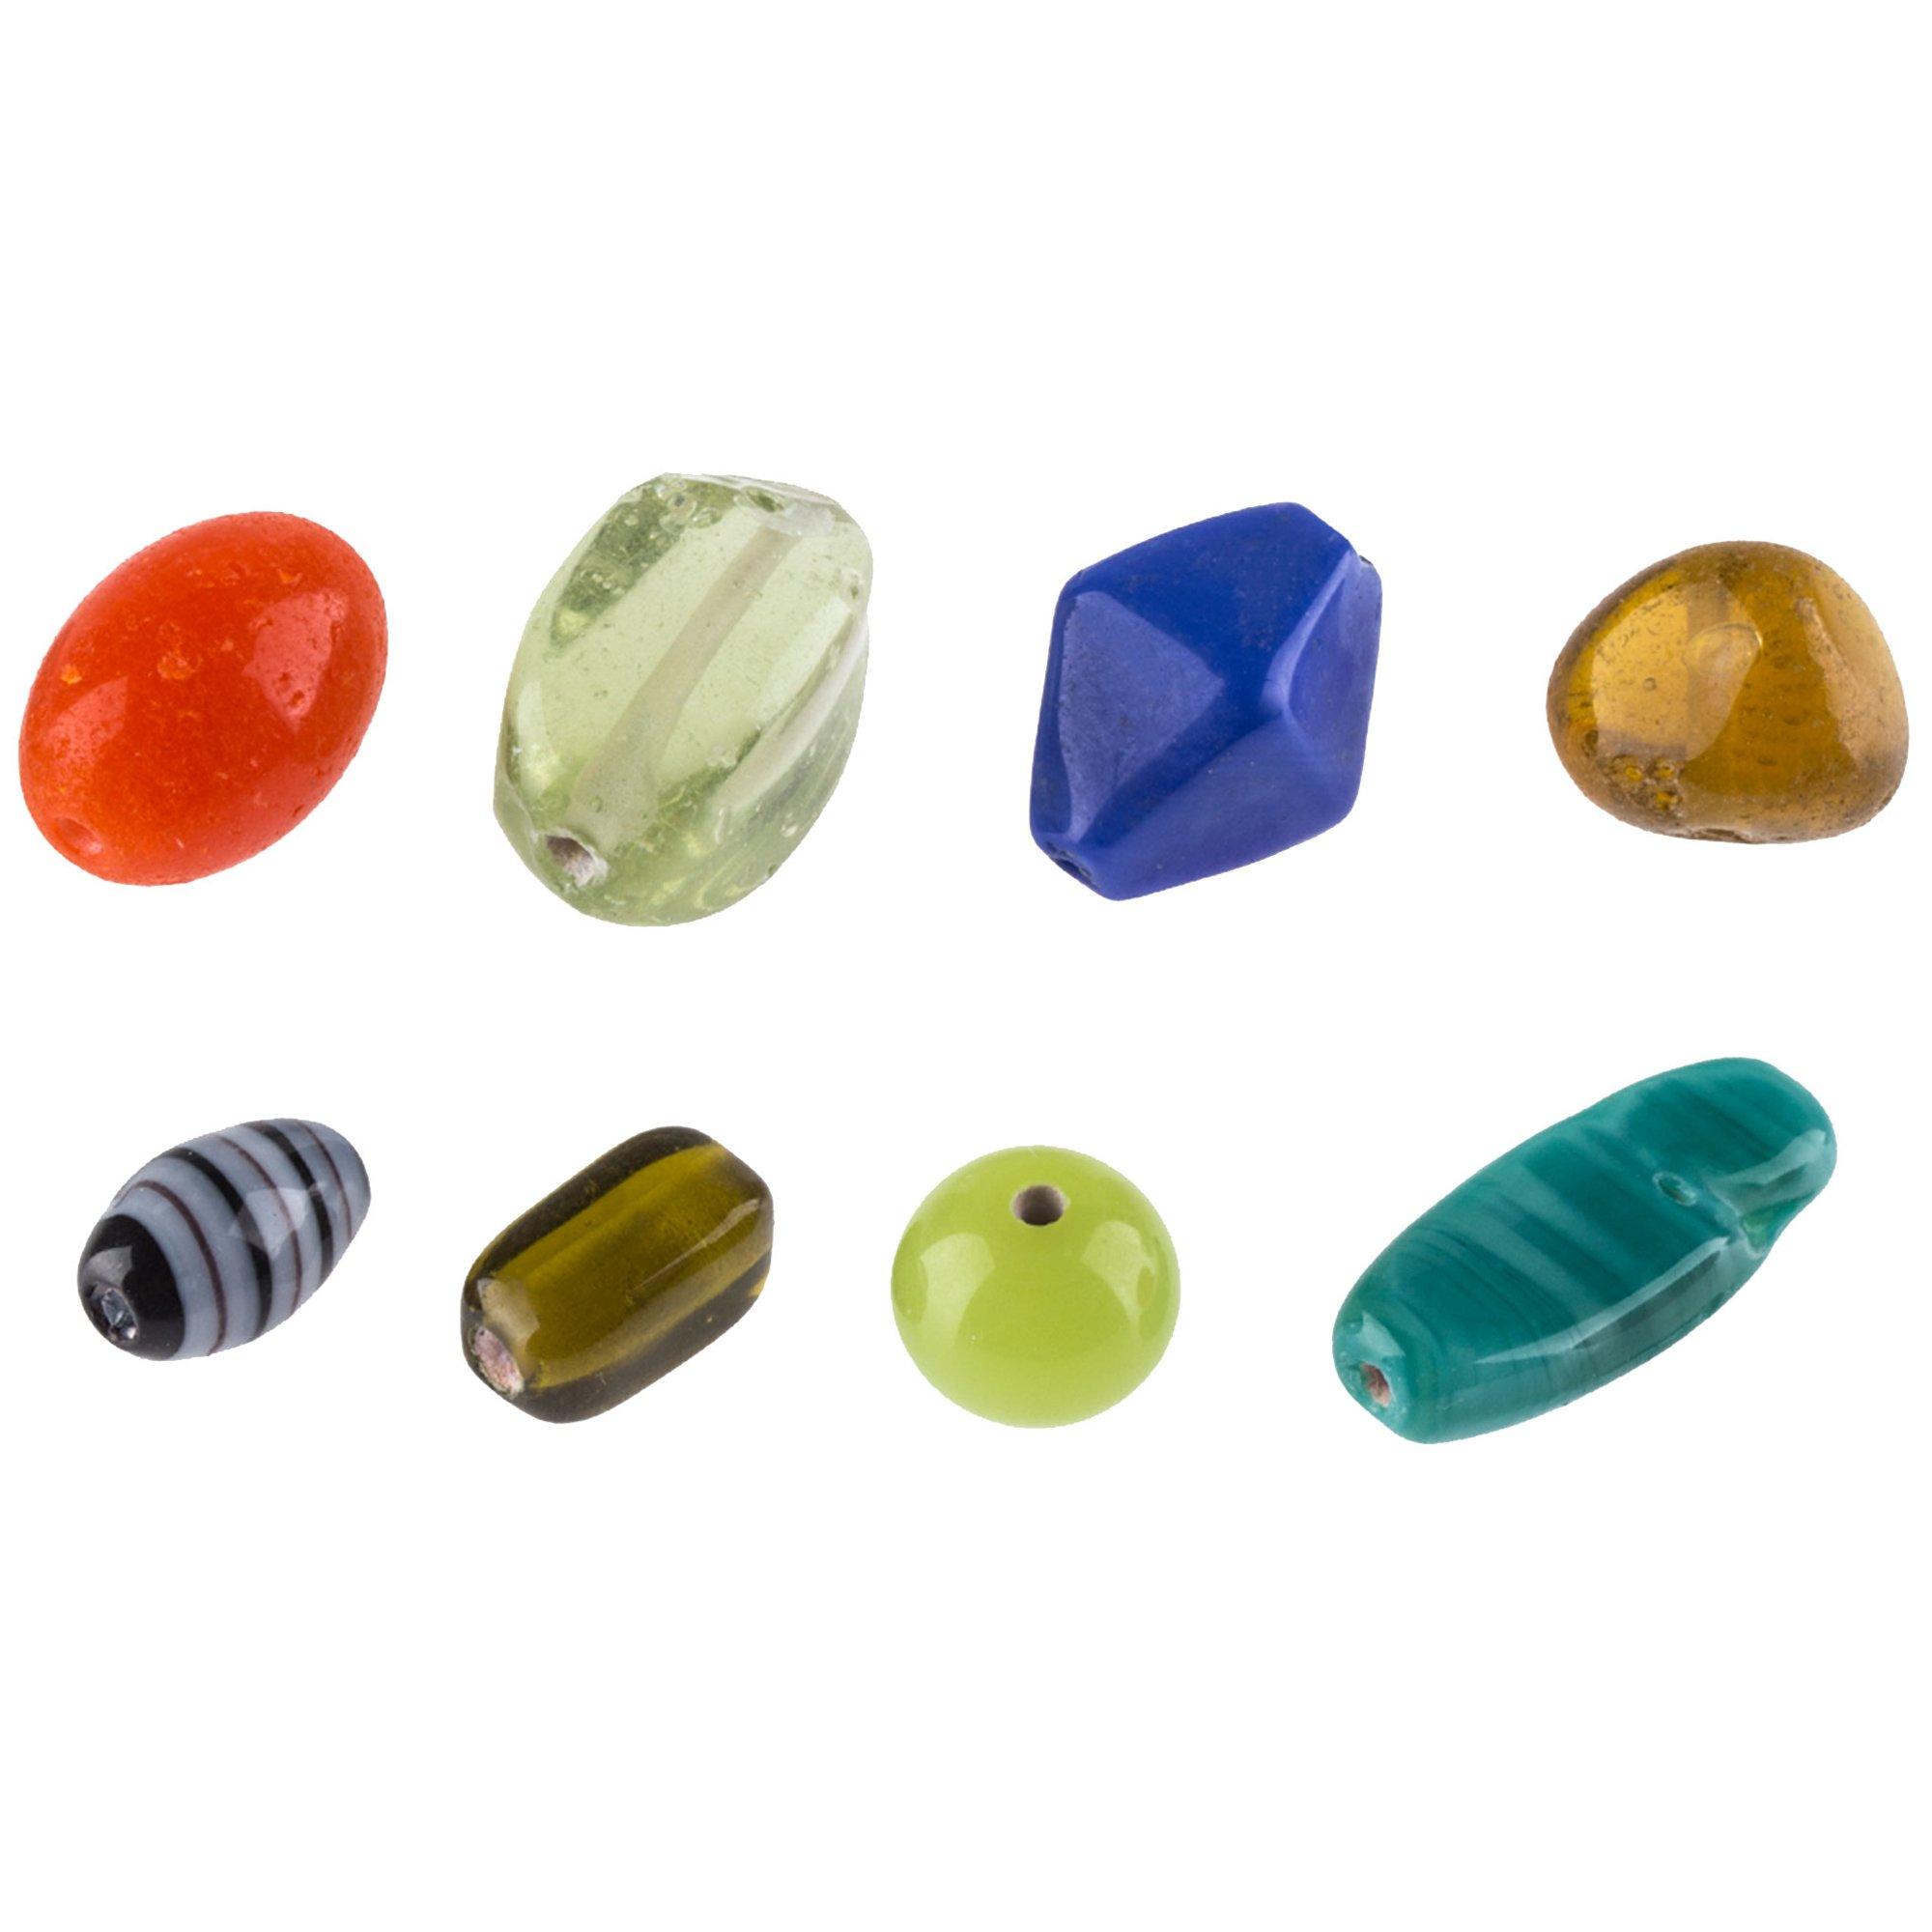 MONTHLY GRAB BAG ----- Assorted Glass Beads for Jewelry Making, DIY Work,  Arts and Crafts, Decorative Hobby